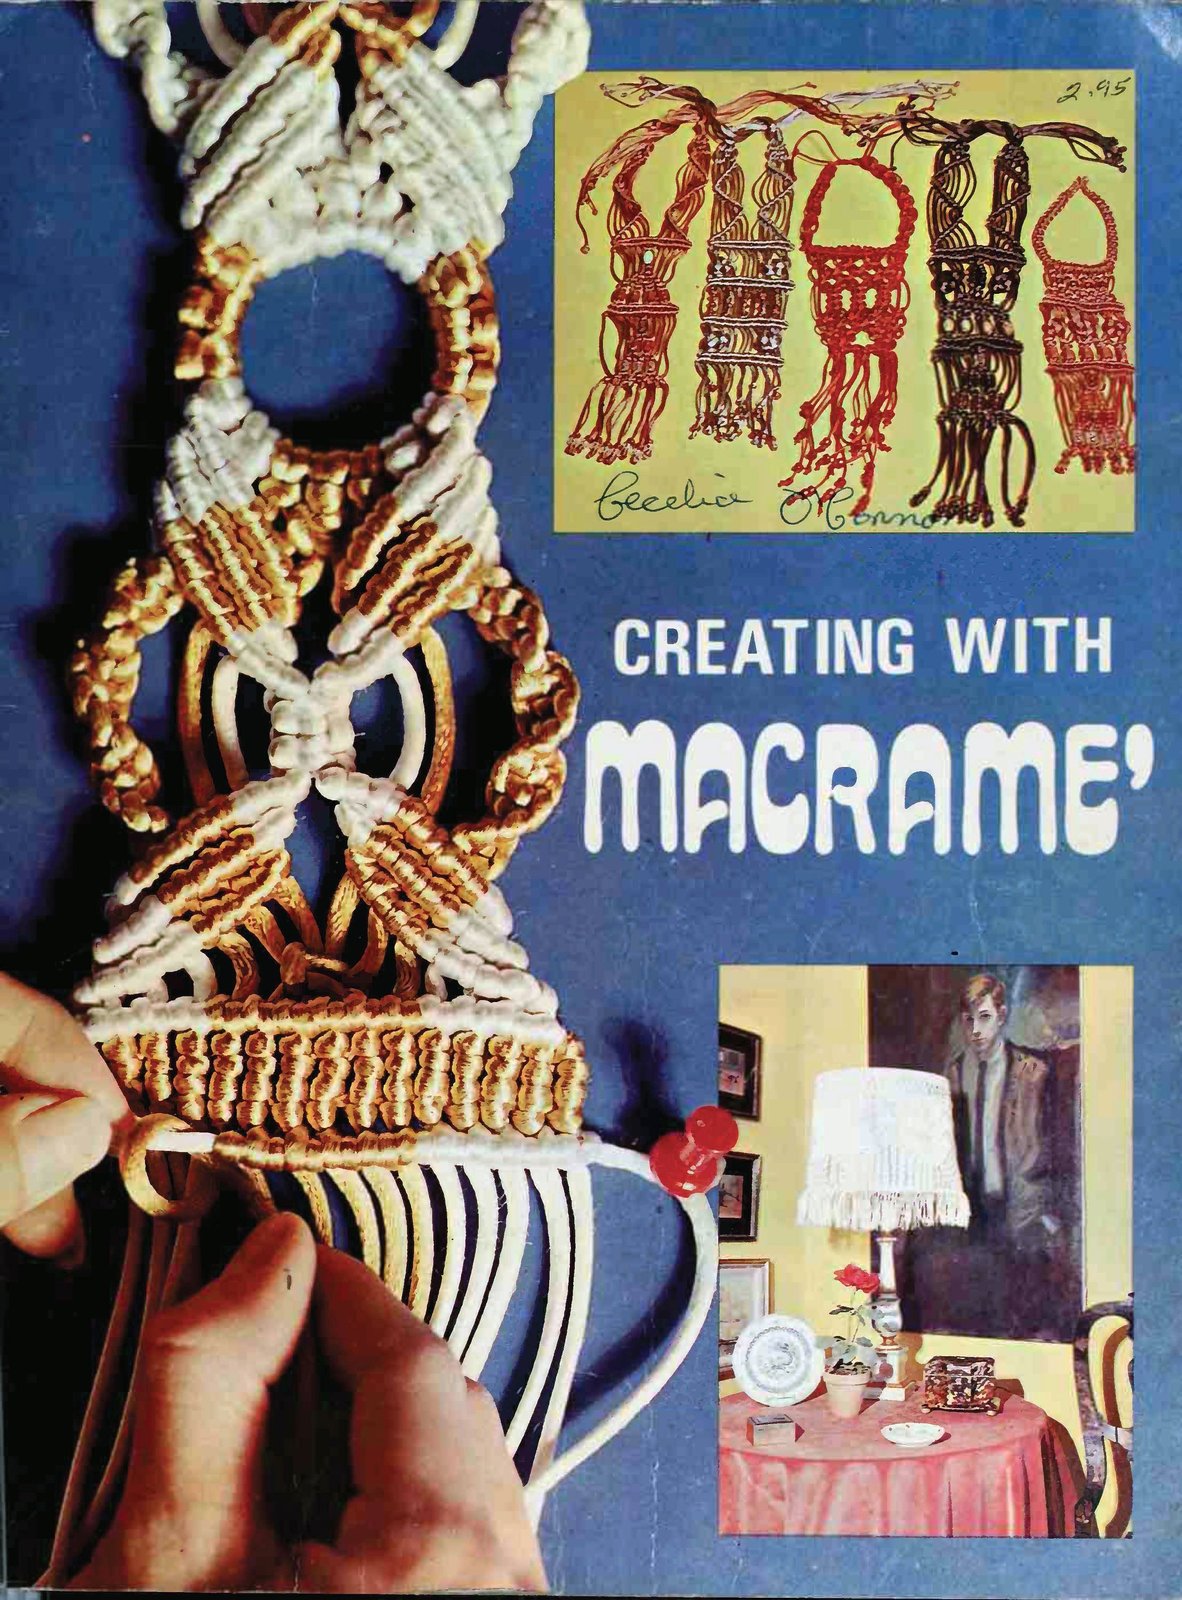 Primary image for Creating with Macrame - Vintage macrame book - Digital download in PDF Format